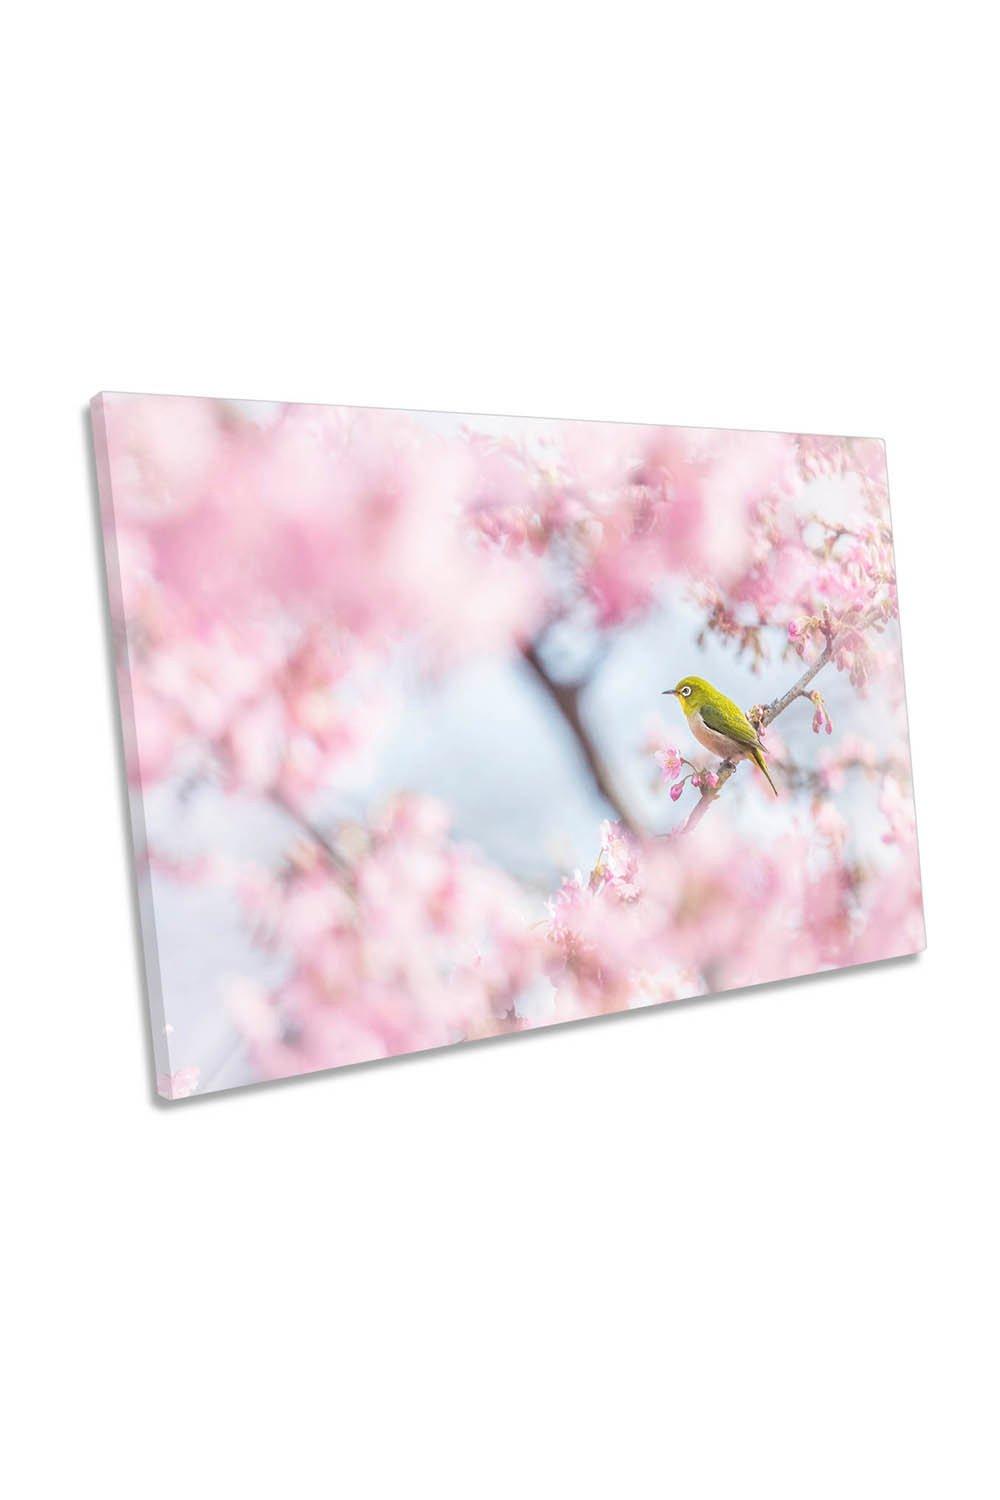 Cherry Blossom Bird Pink Floral Canvas Wall Art Picture Print